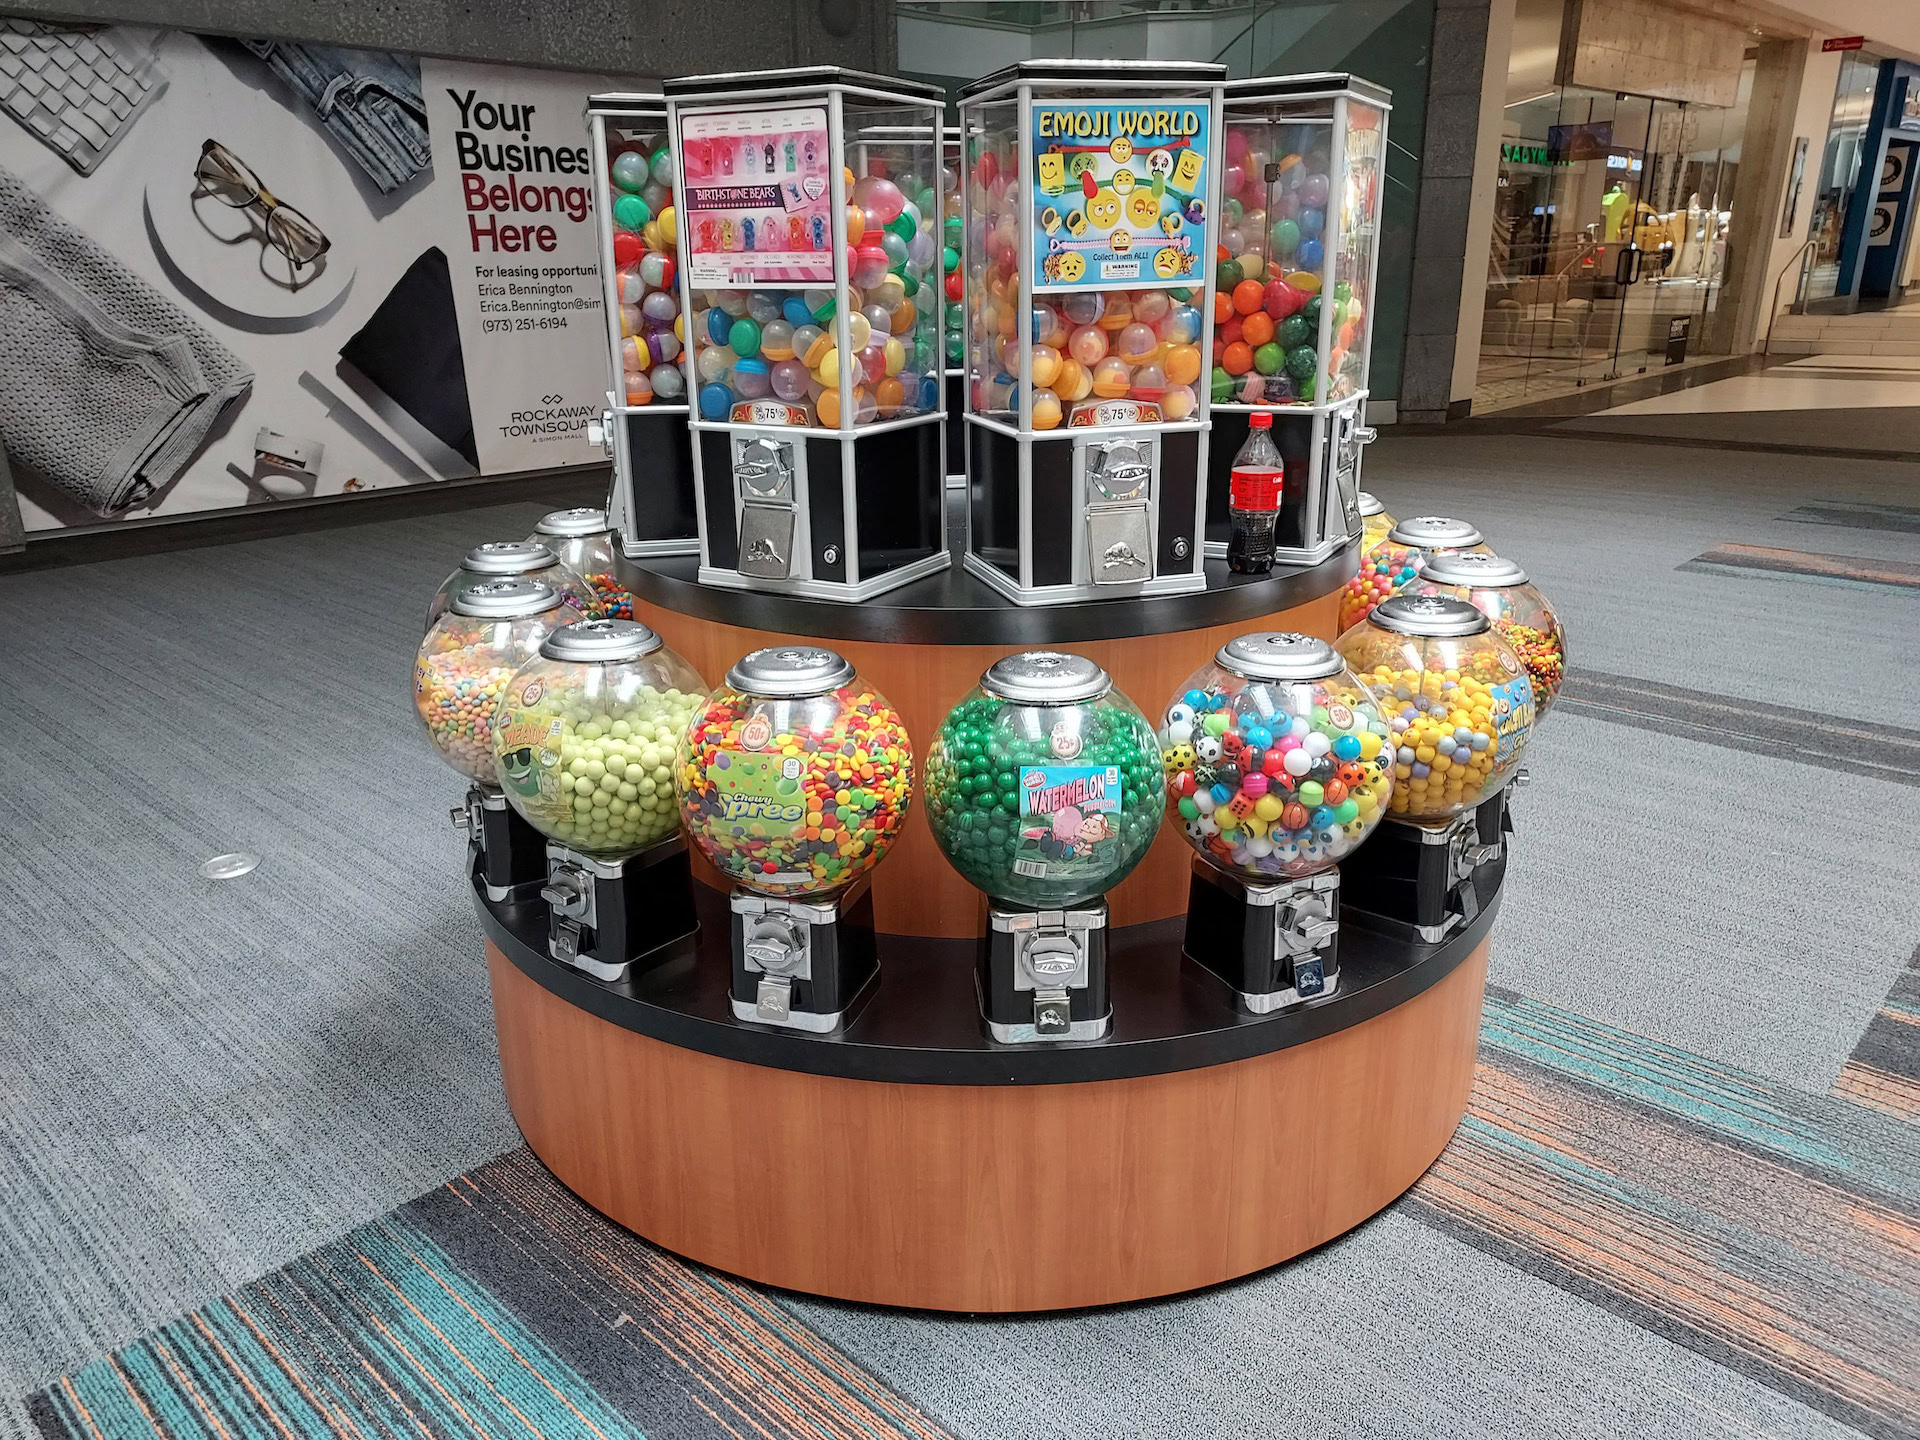 Samsung Galaxy A42 photo sample showing gumball machines